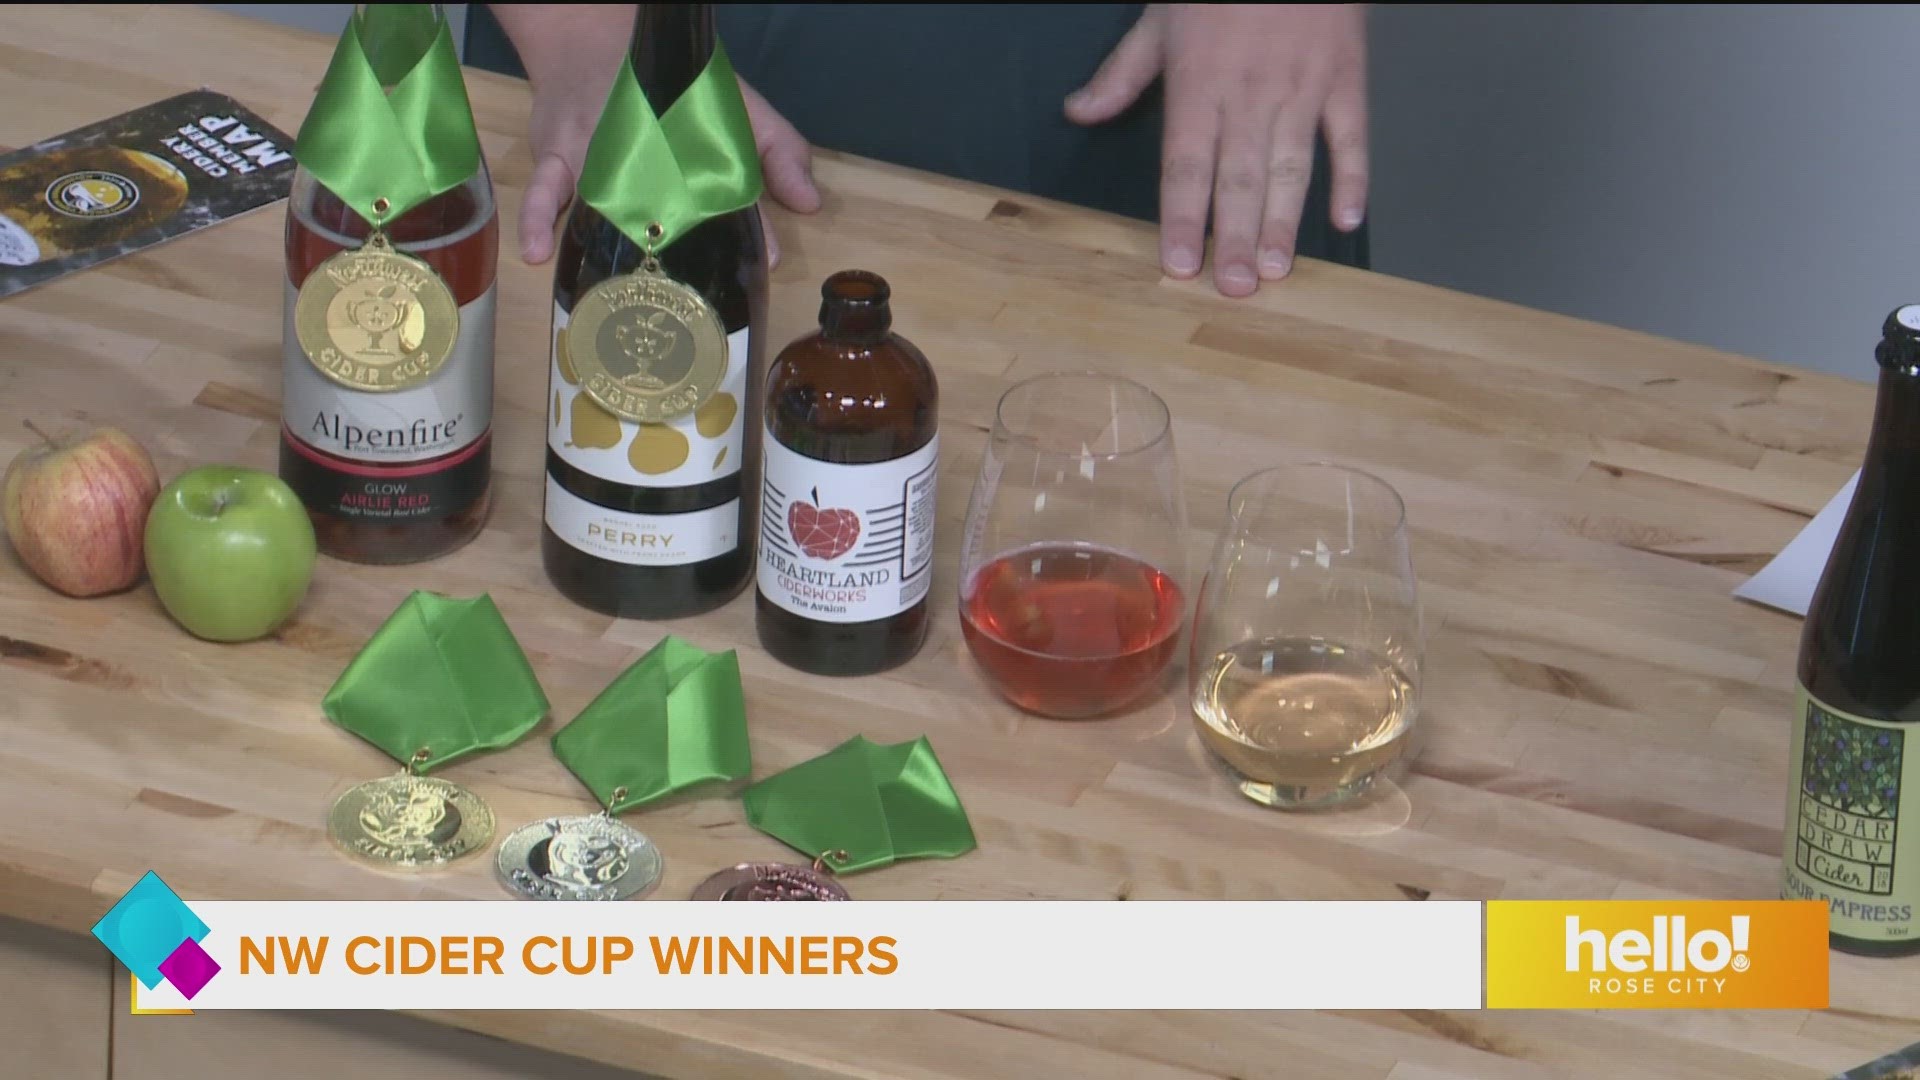 This year's winners include Alpenfire Cider, Yonder Cider and Heartland Ciderworks